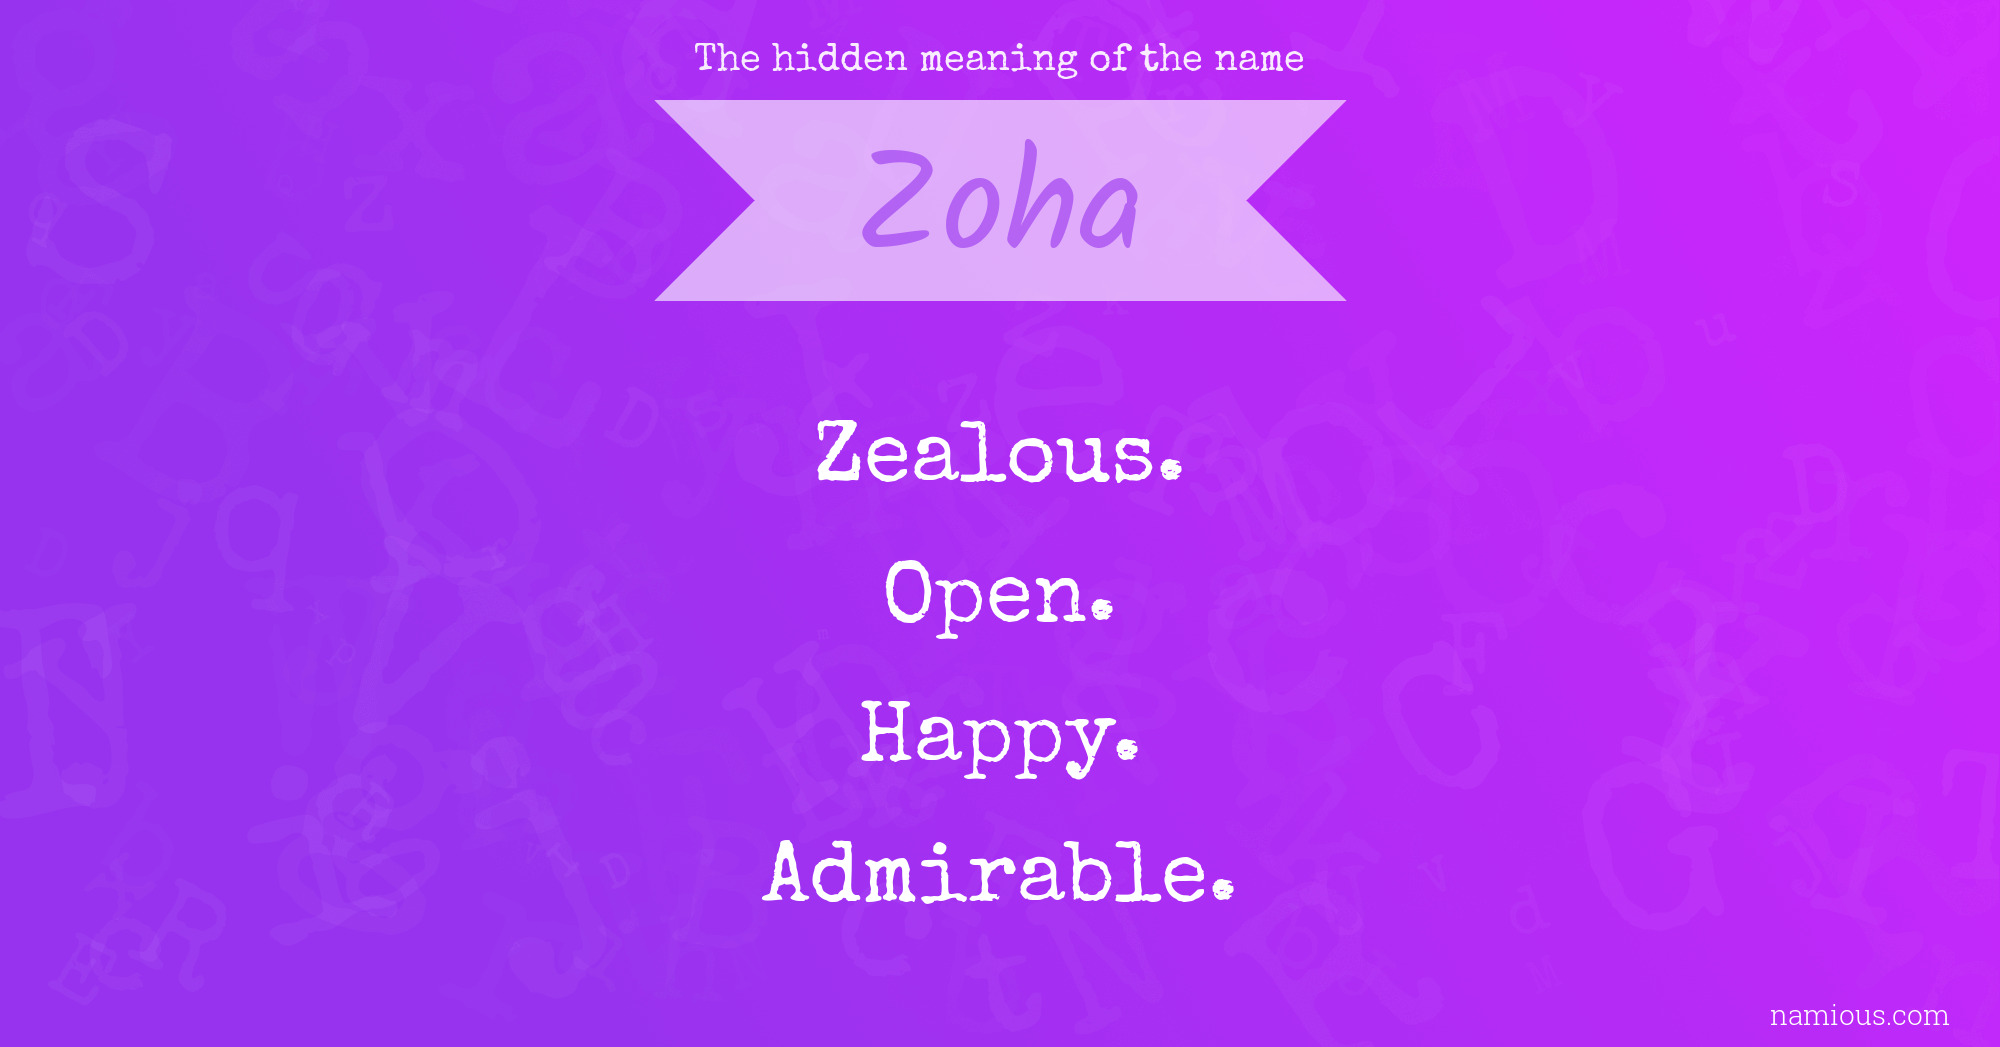 The hidden meaning of the name Zoha